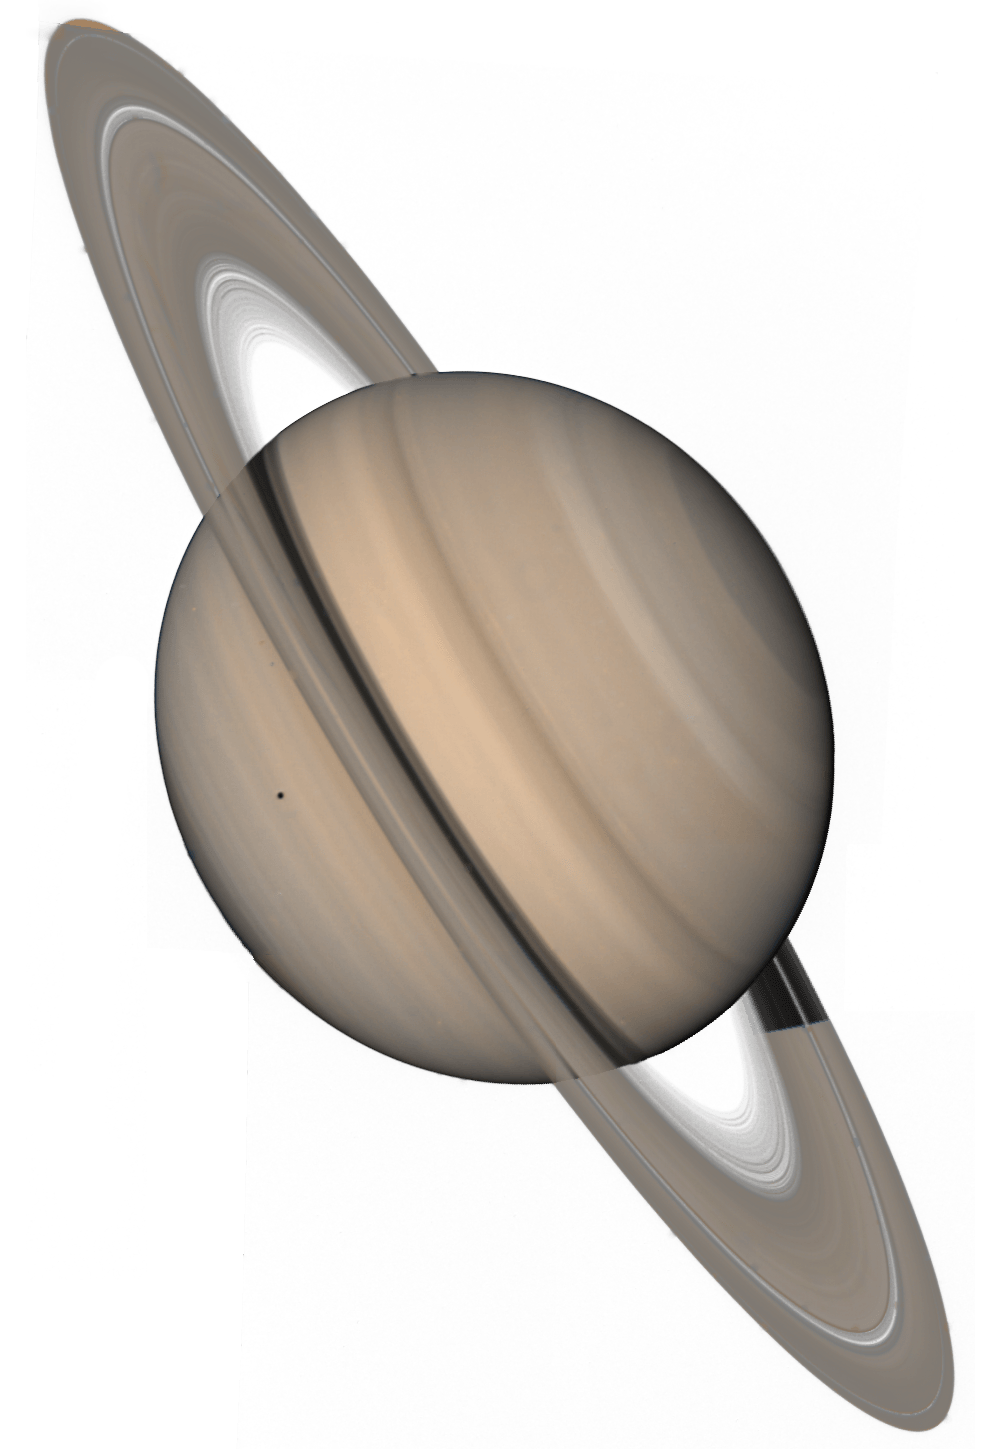 Planet Saturn associated with the numerology of 80